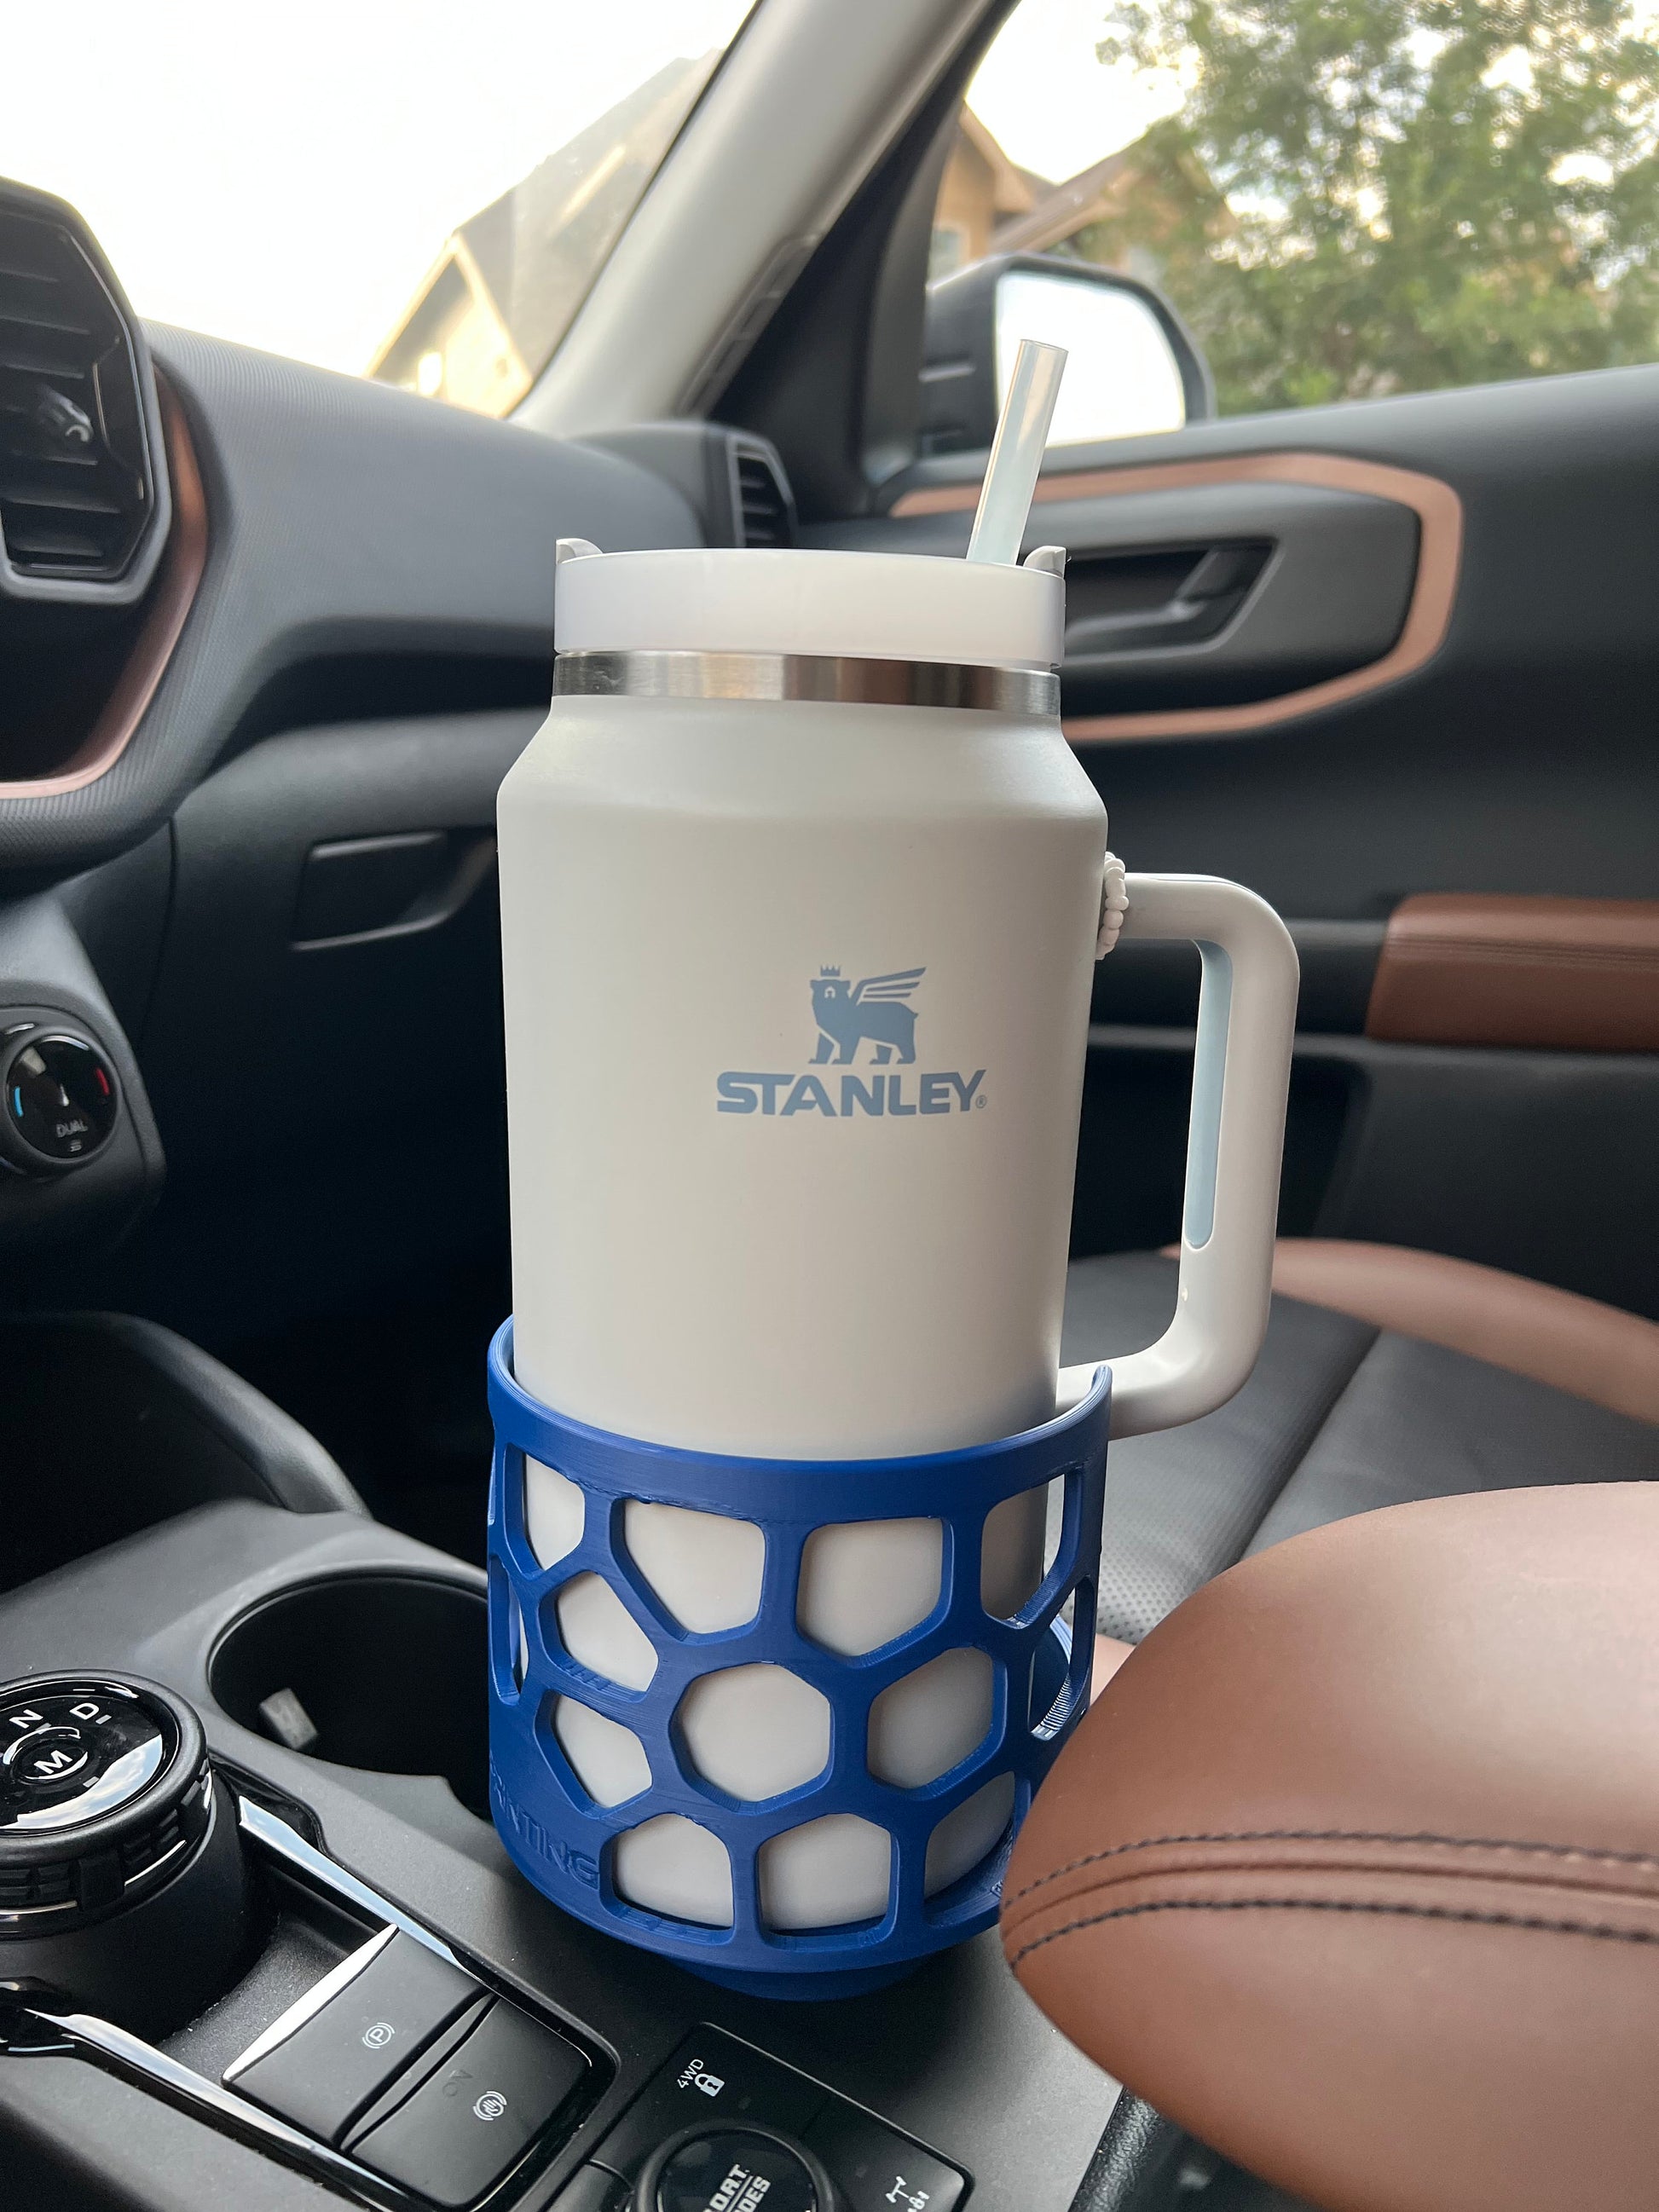 A blue car cup holder adapter holding a 64 oz yeti tumbler water mug in a car